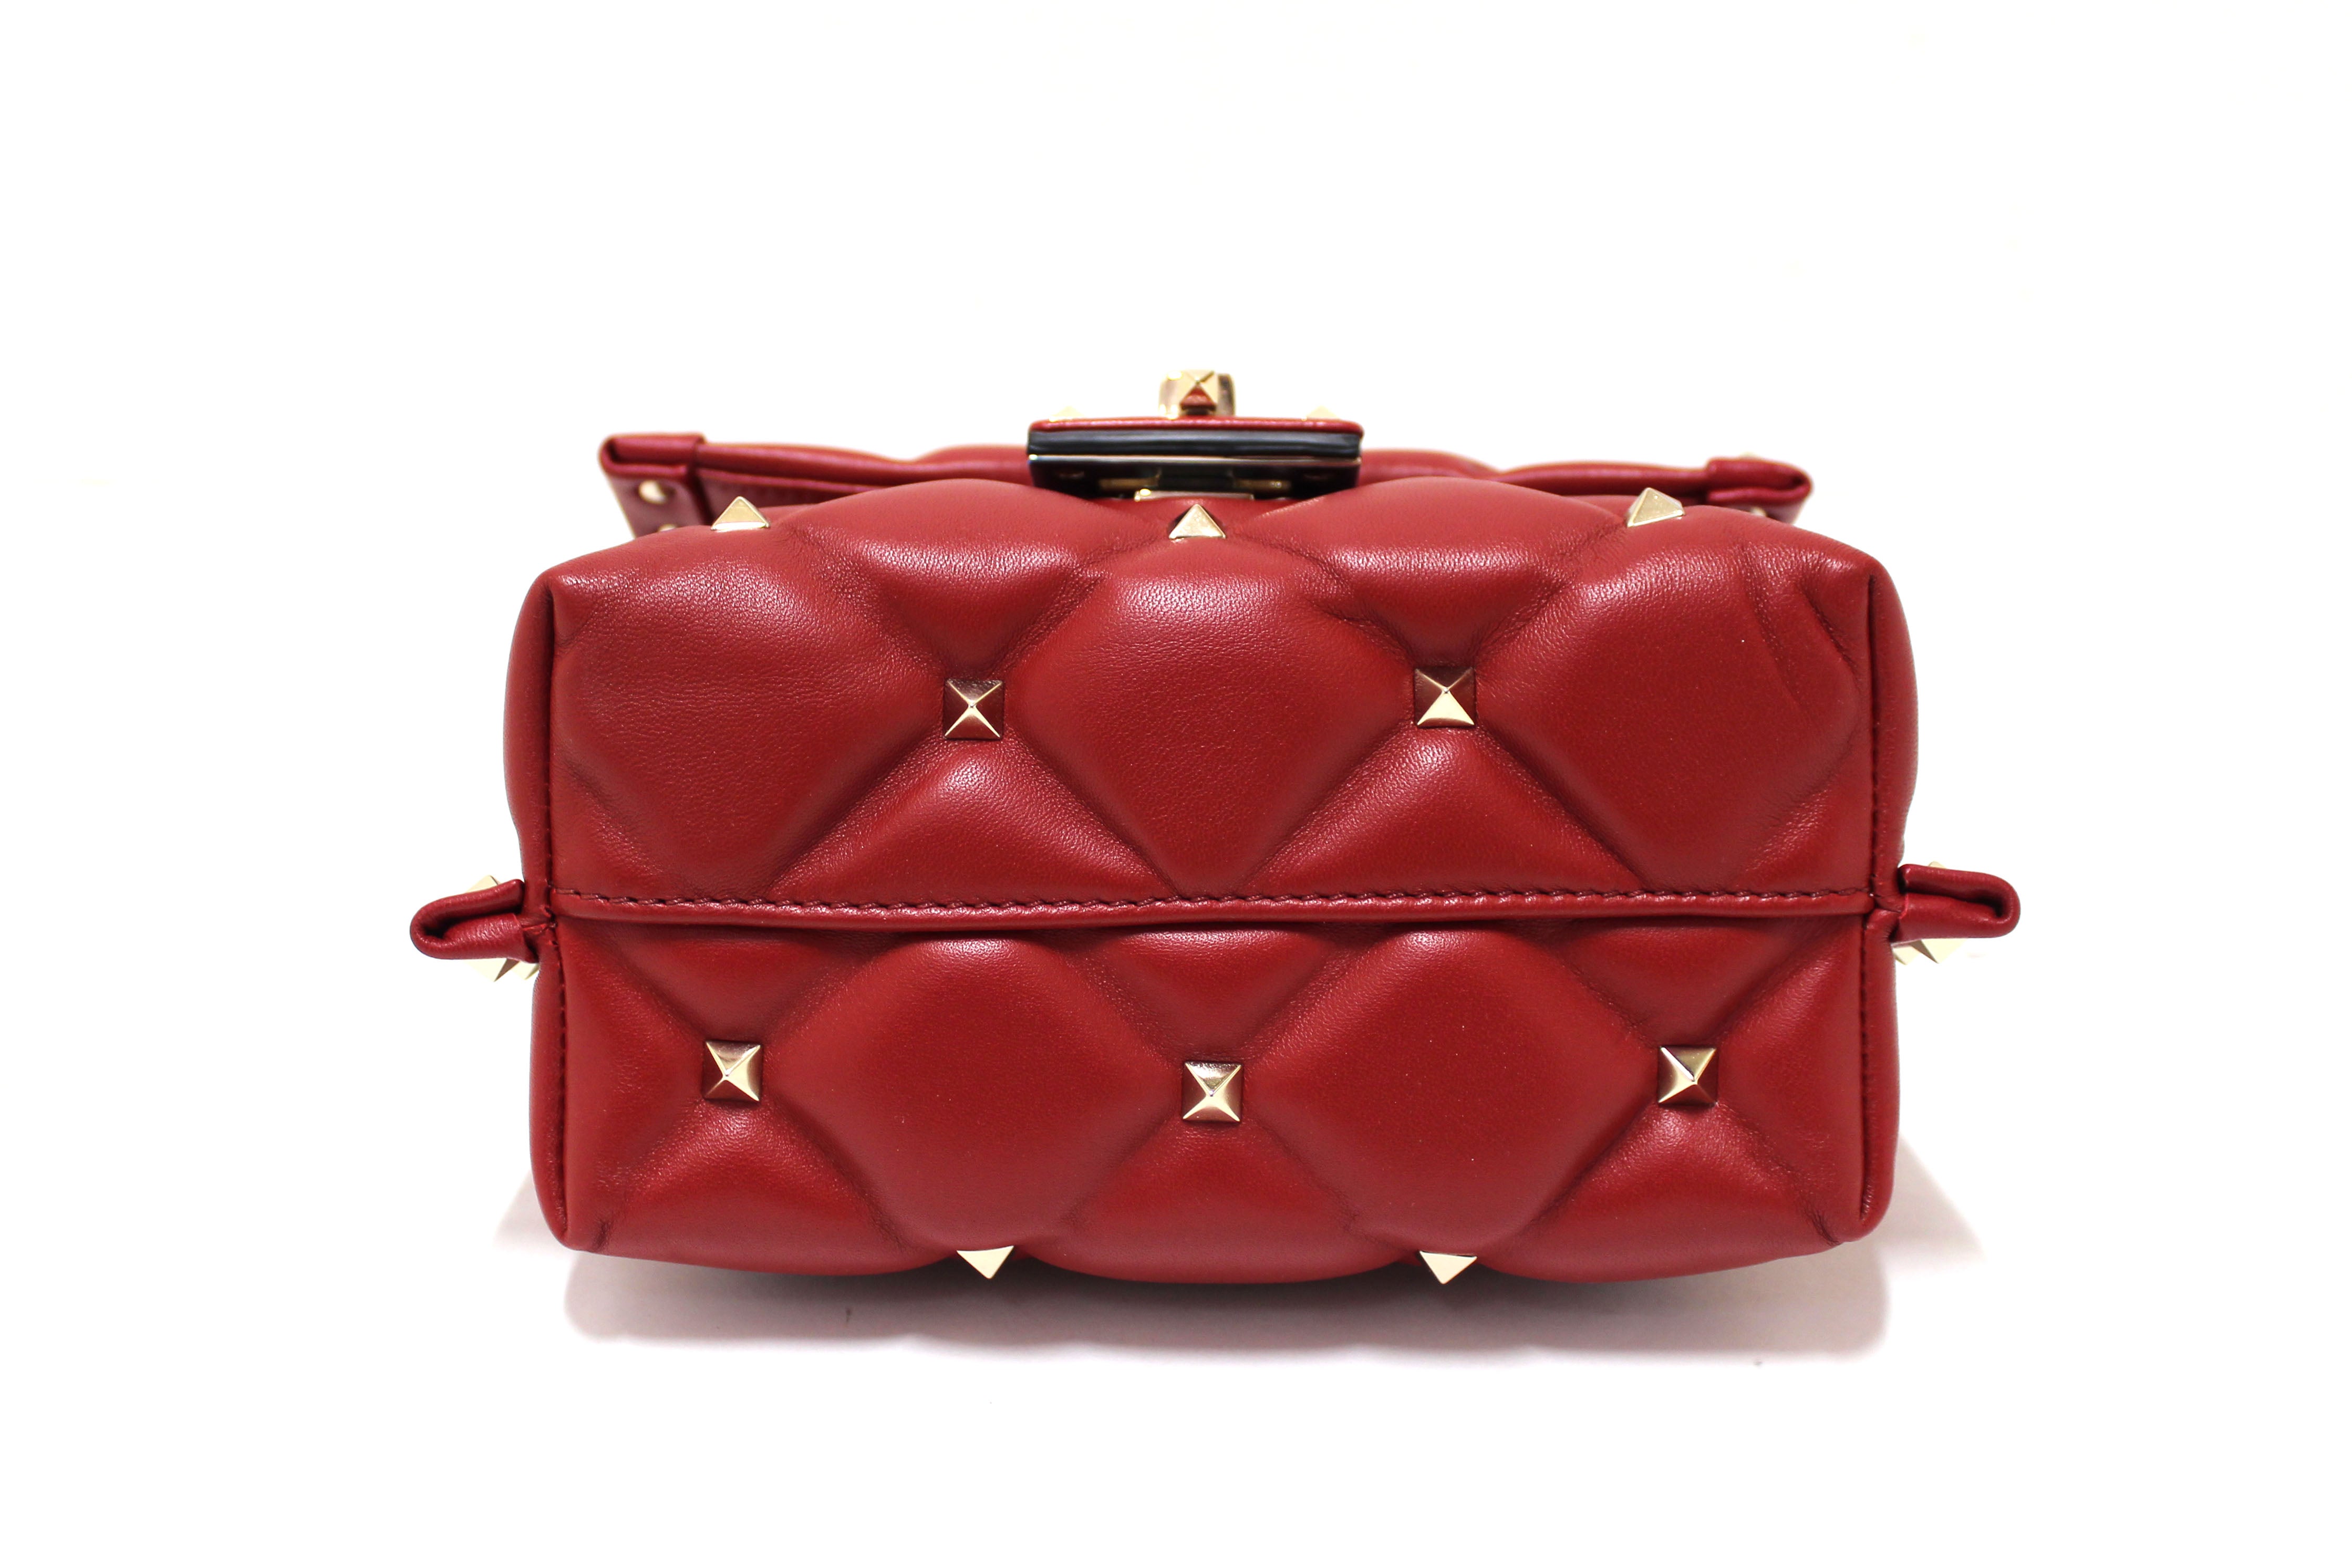 Authentic NEW Valentino Garavani Red Quilted Leather Mini Candystud Top Handle Bag